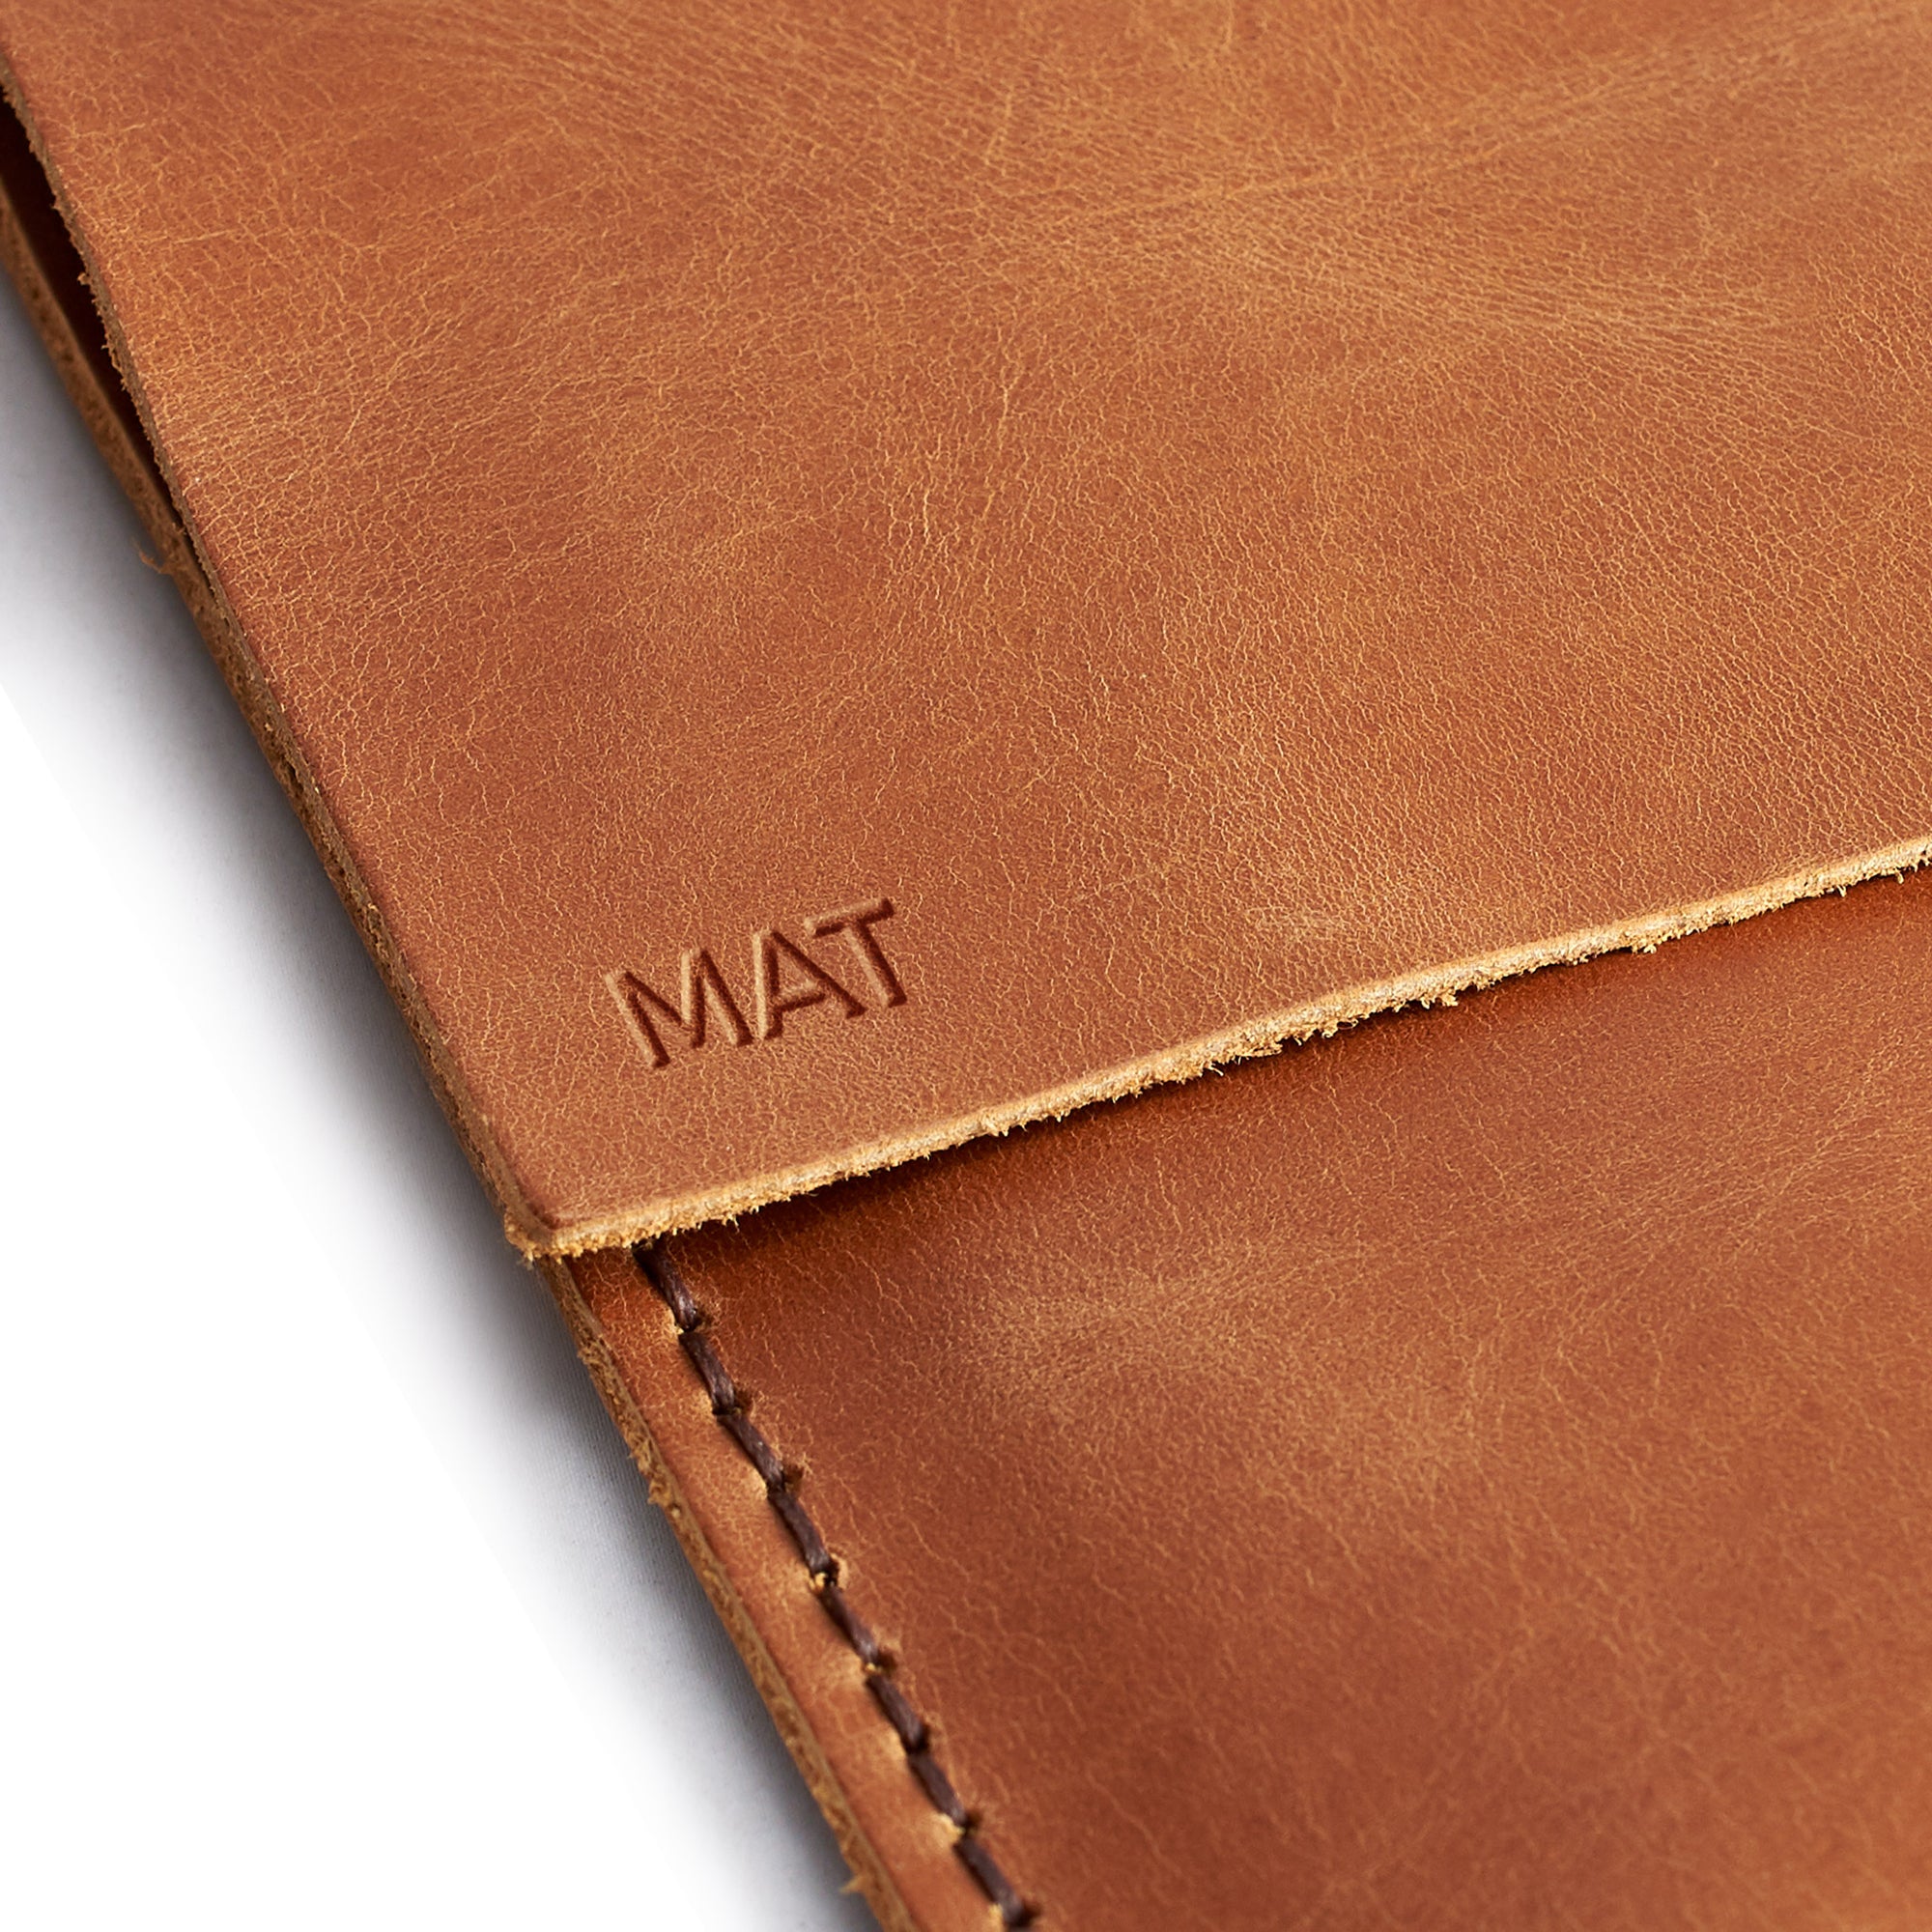 Custom monogrammed case. Leather Dell XPS Sleeve Case by Capra Leather